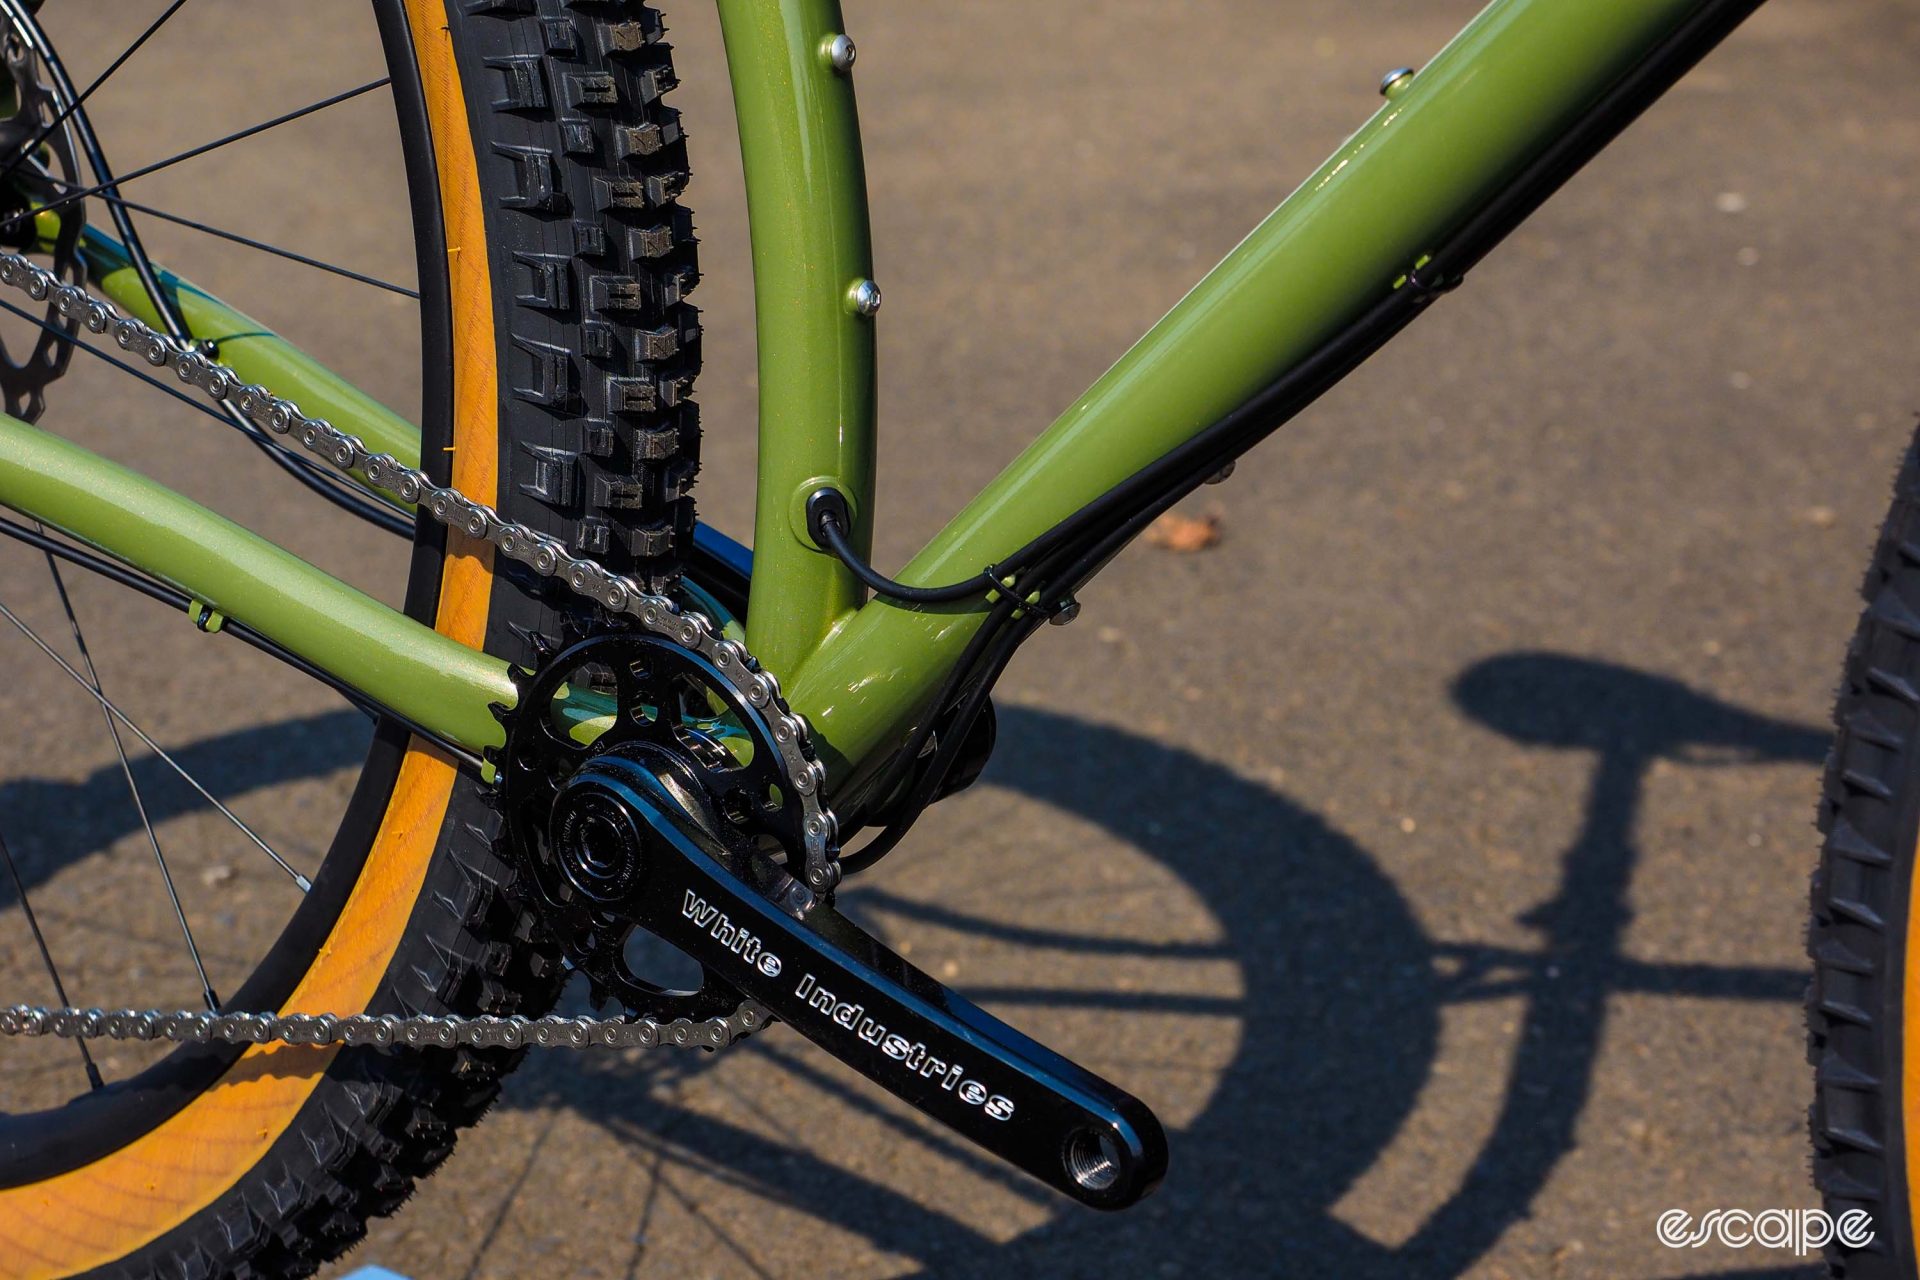 Elegant-looking cable routing on a Black Cat custom steel fully rigid 29er.